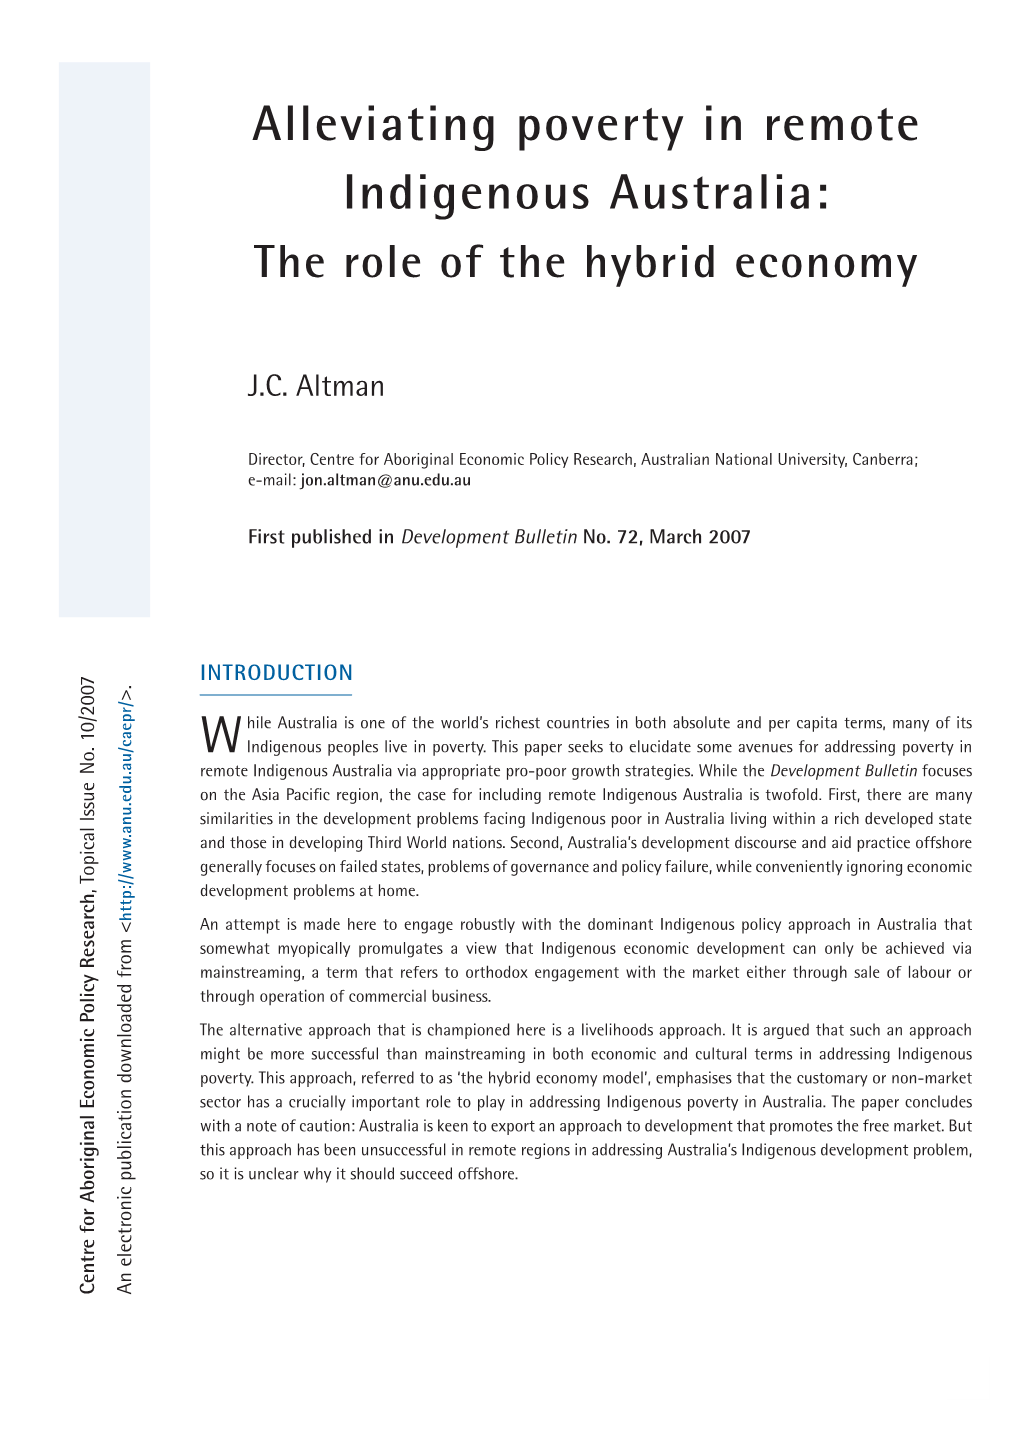 Alleviating Poverty in Remote Indigenous Australia: the Role of the Hybrid Economy